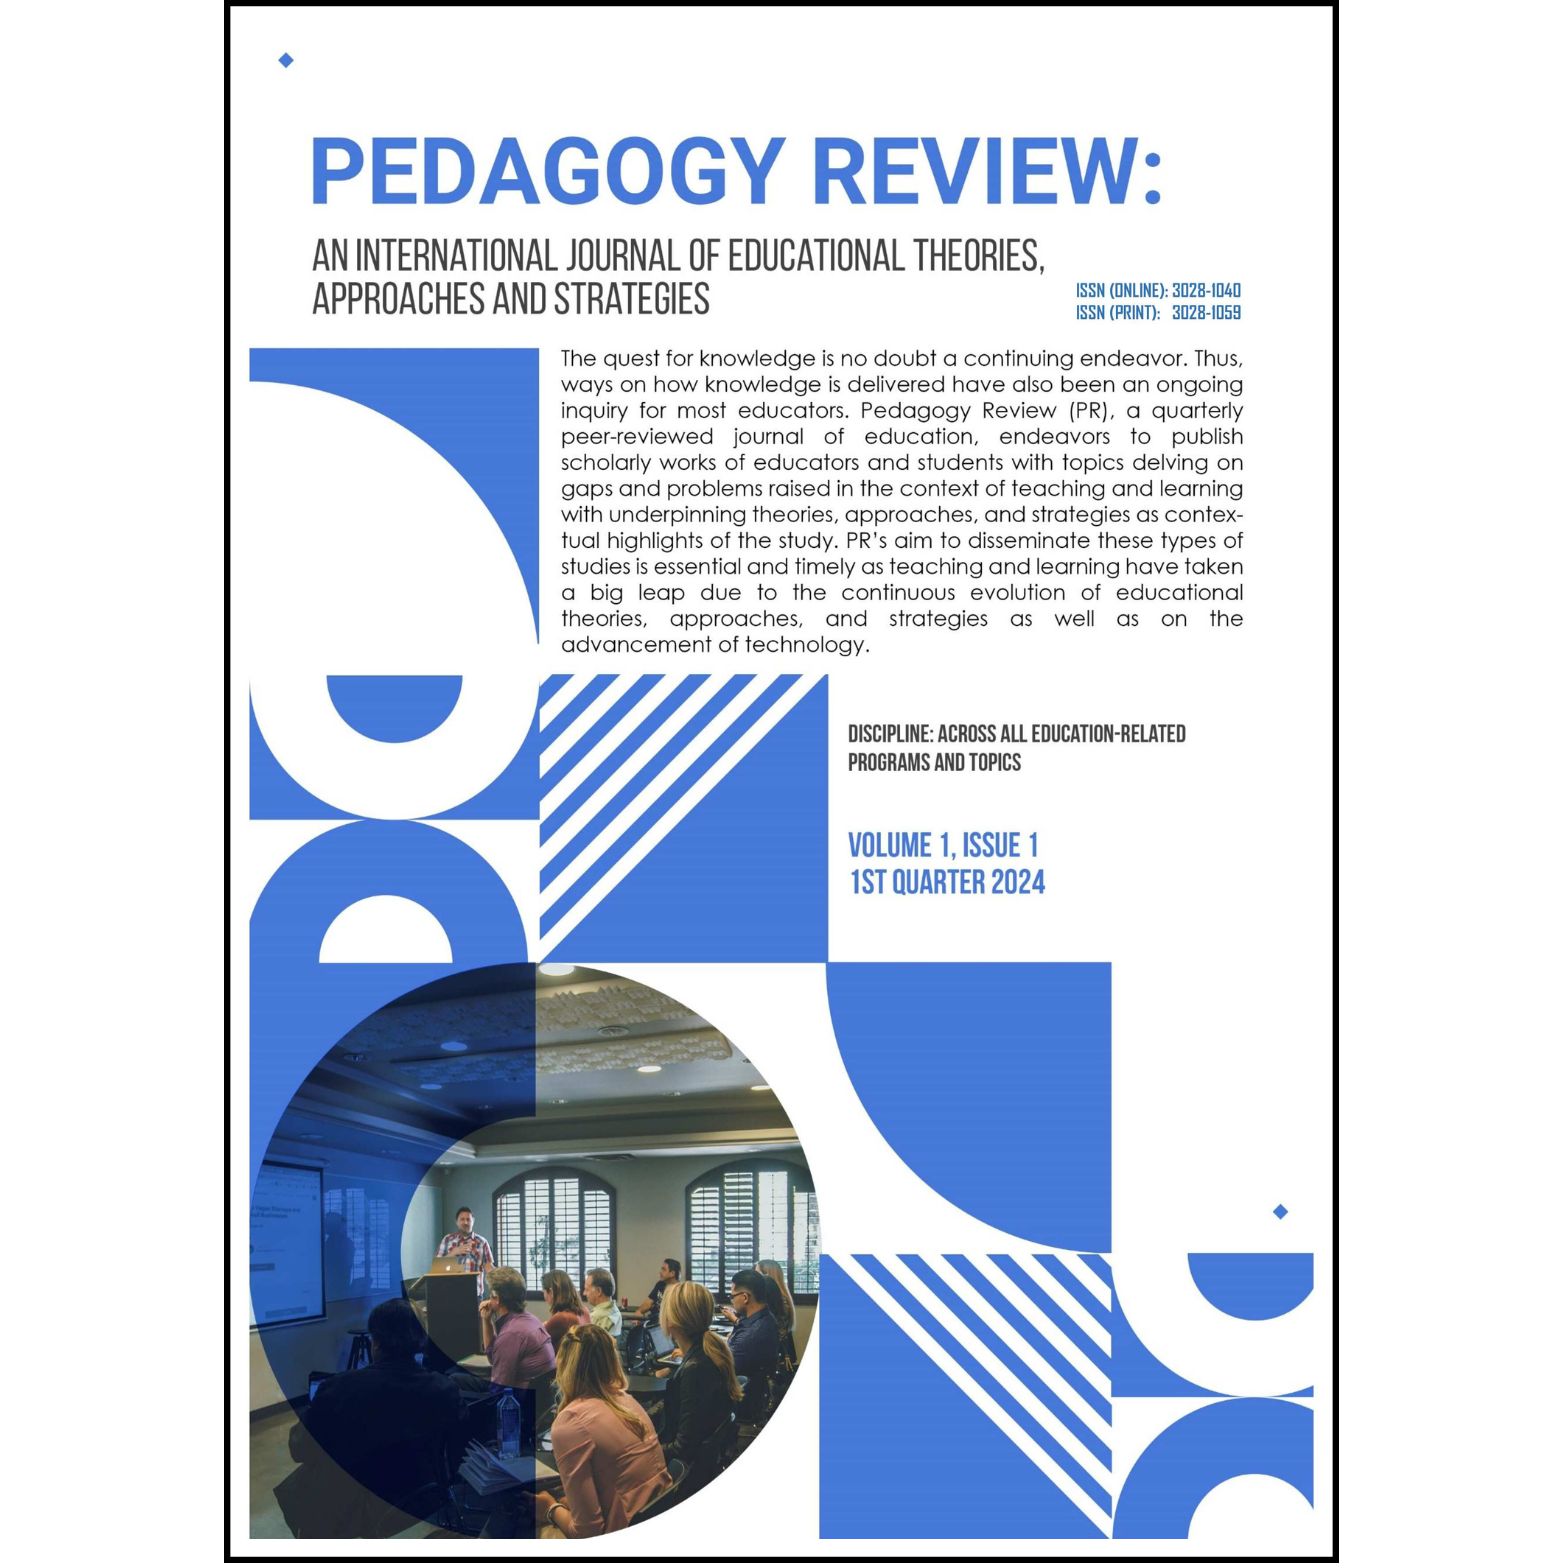 Pedagogy Review: An International Journal of Educational Theories, Approaches and Strategies